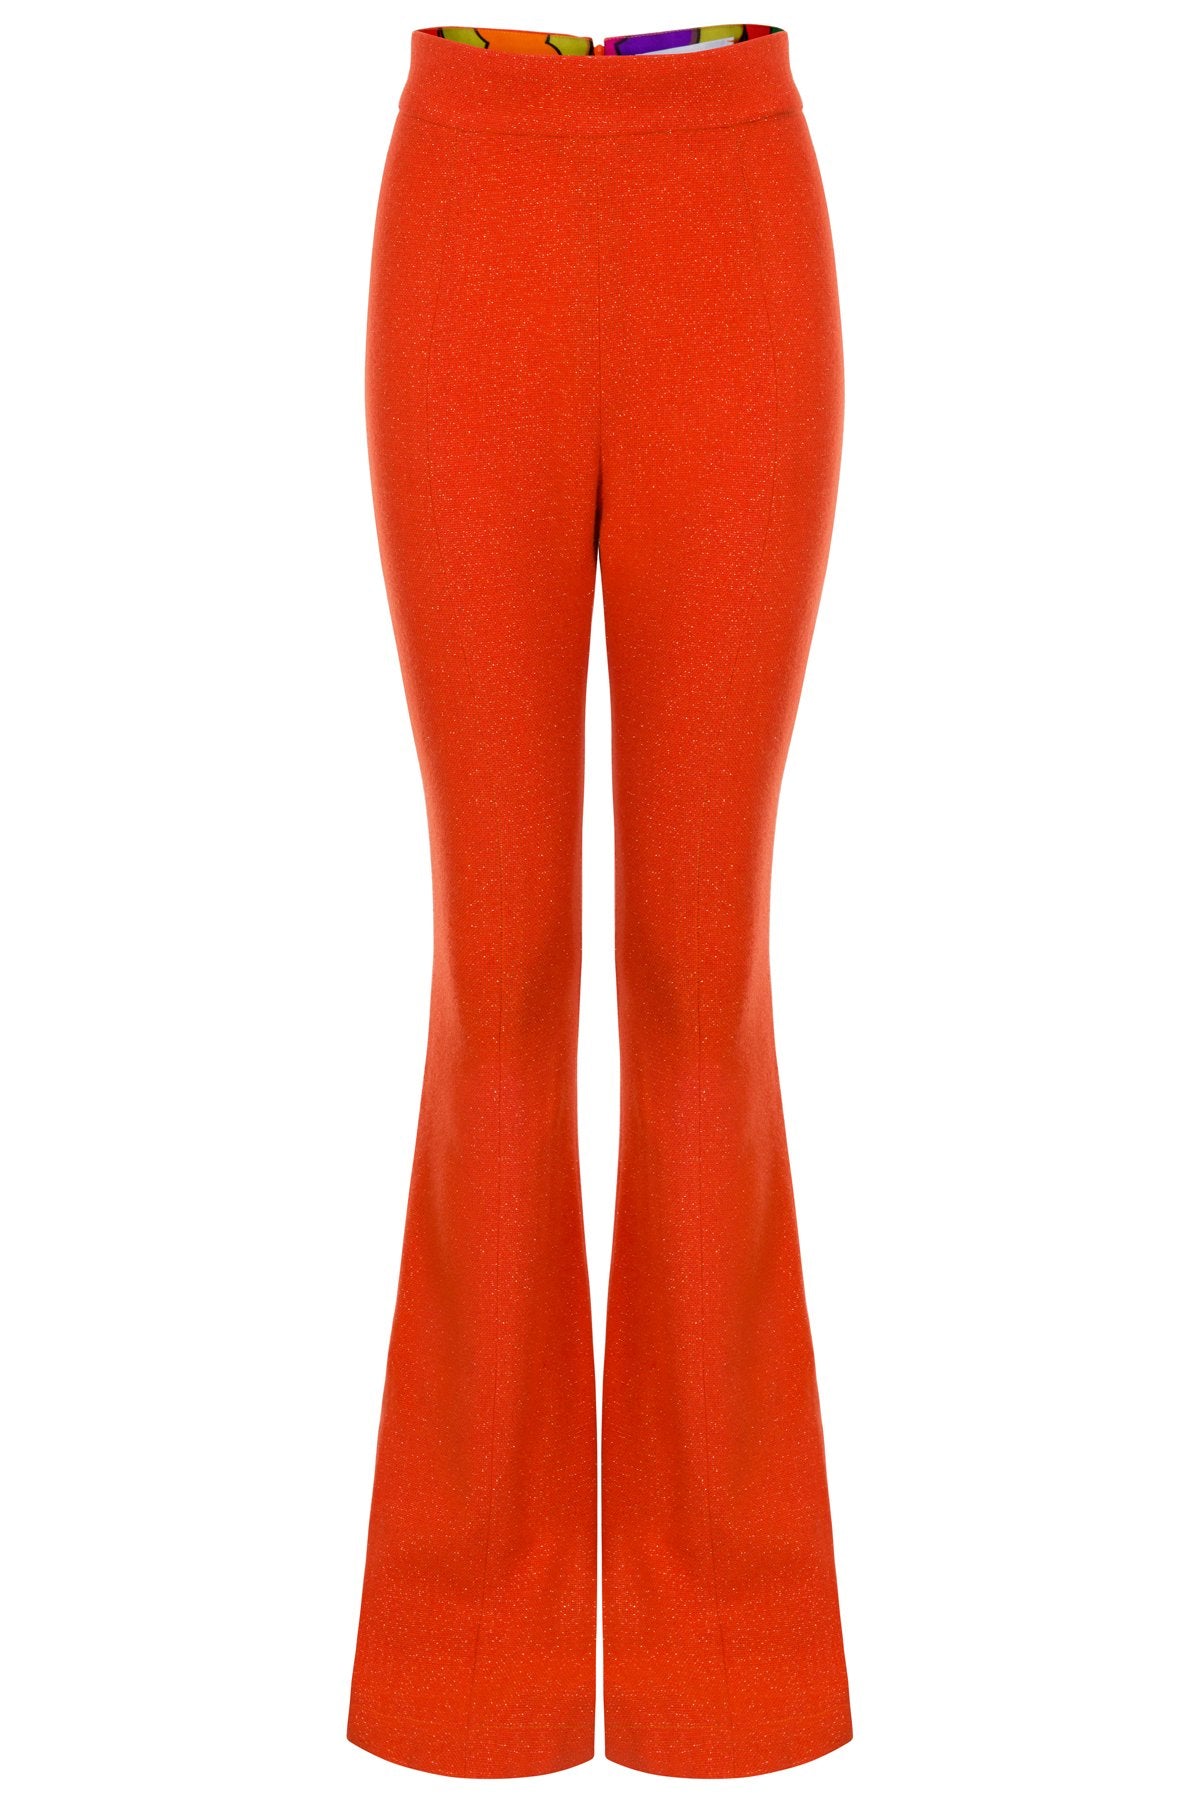 Pre-Order Suzy Wool Blend Flared Trousers - Women's Trousers : Natalie & Alanna - Women's Clothing & Accesssories